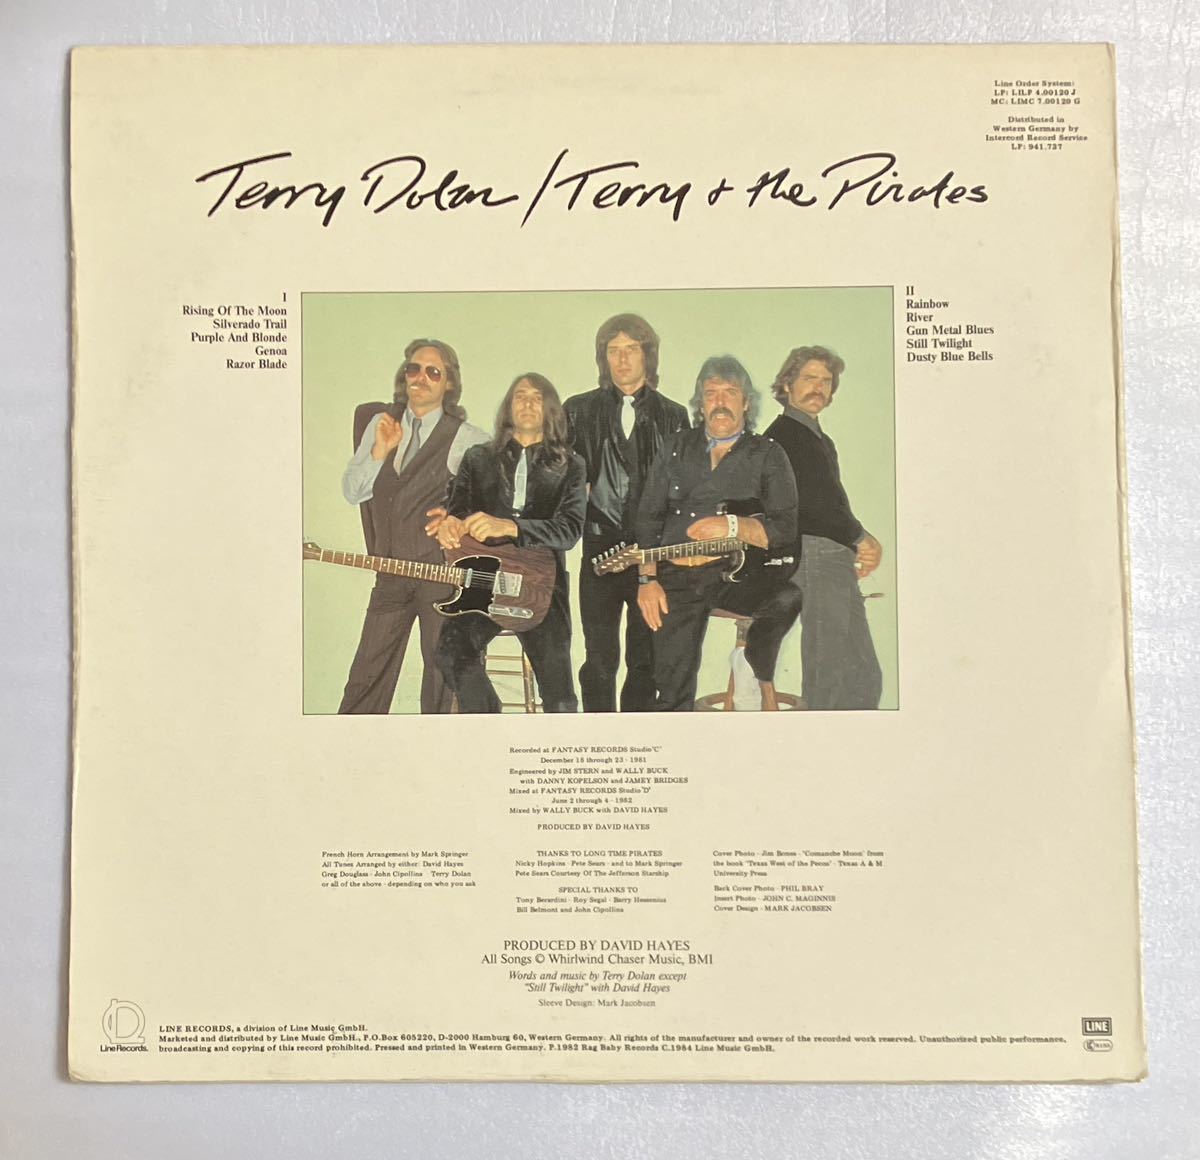 Terry Dolan, Terry & The Pirates「Rising Of The Moon」[輸入盤レコード] LP, テリー・ドーラン, Nicky Hopkins, Pete Sear_画像2